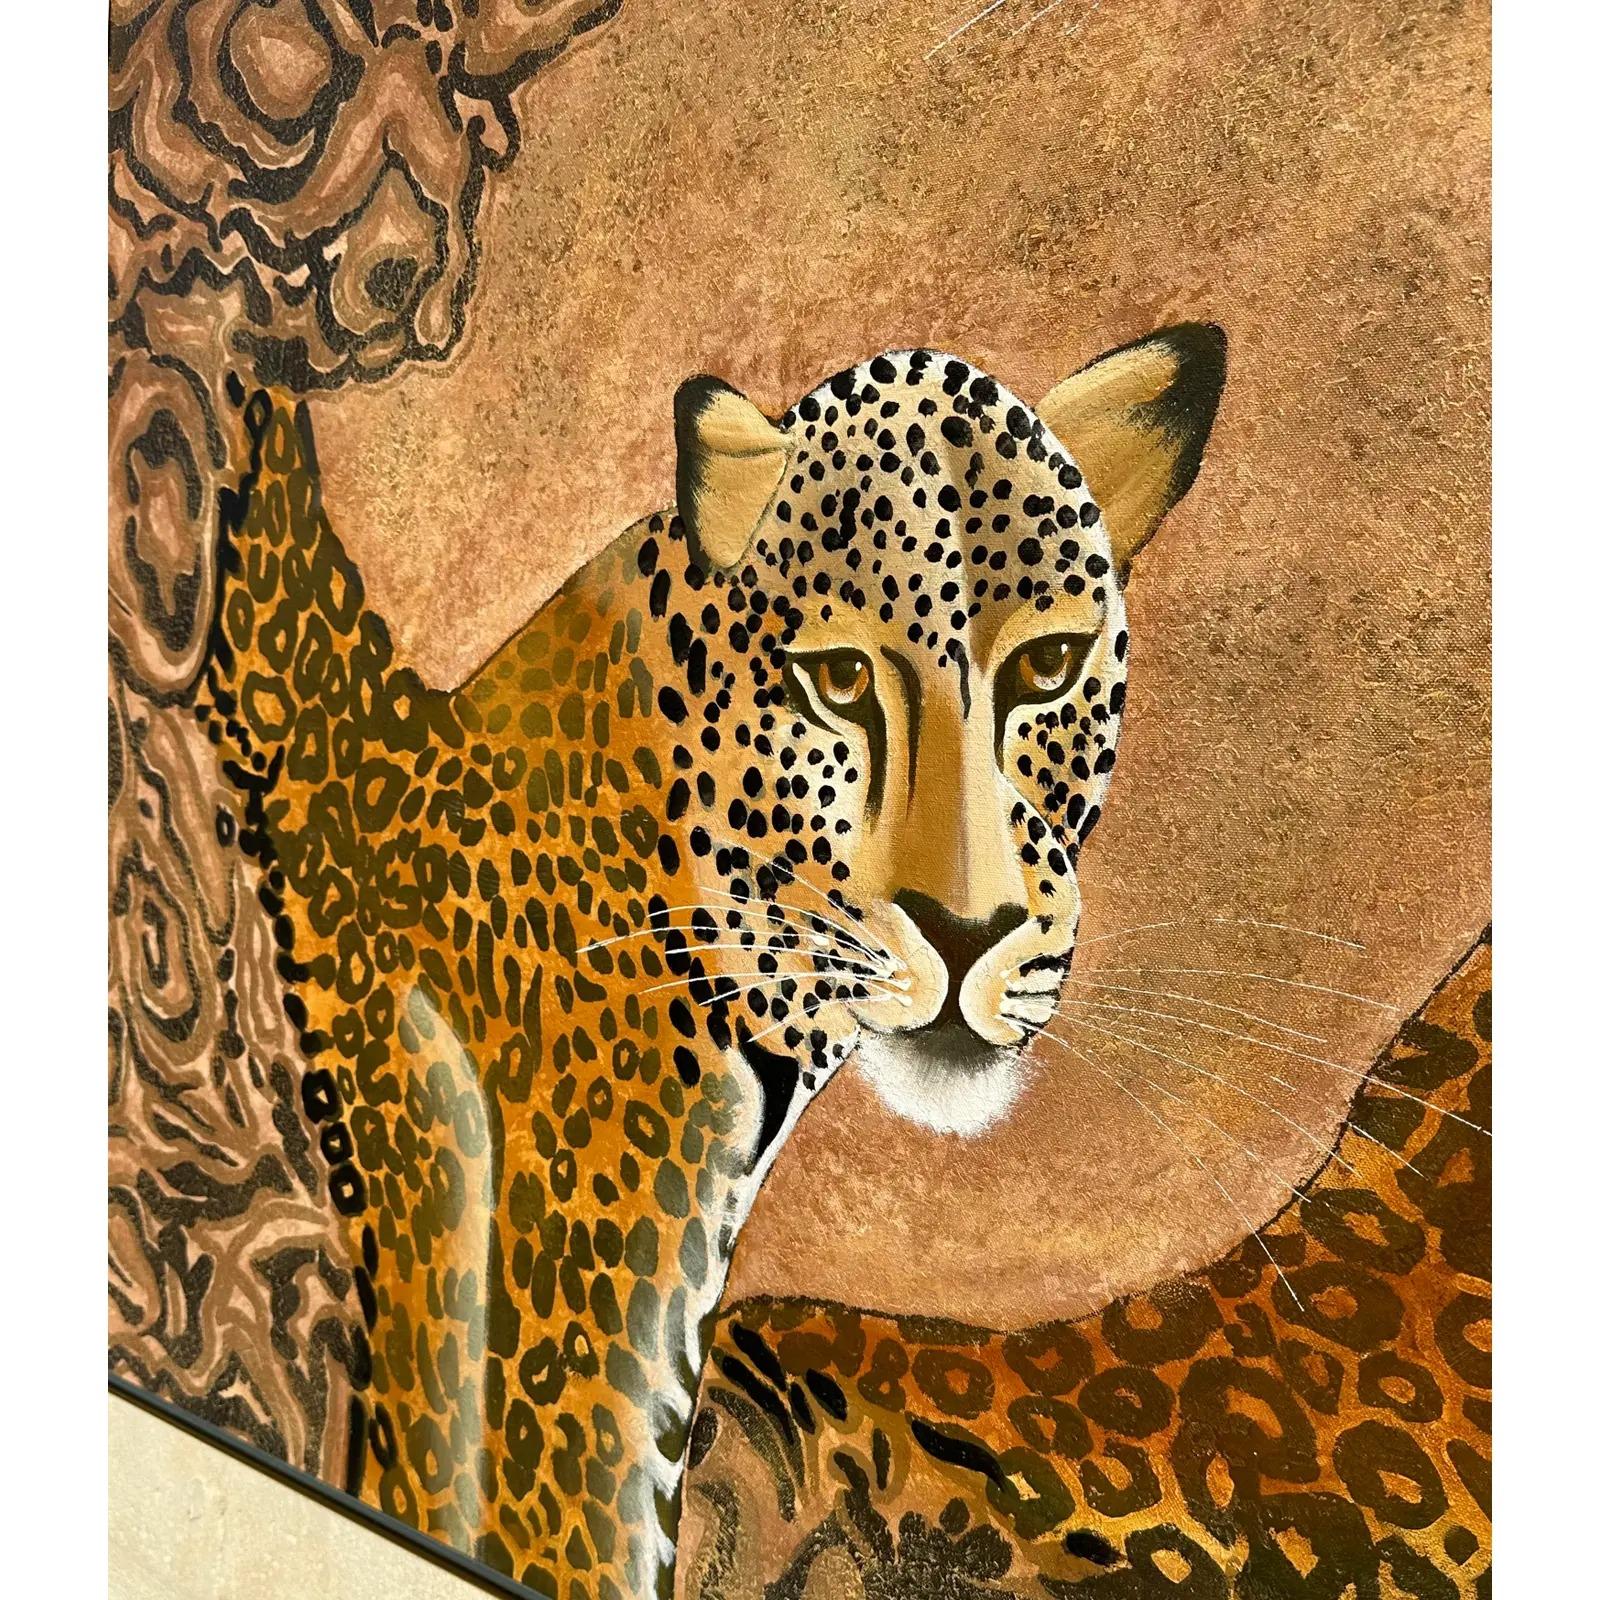 North American Vintage Boho Signed Original Oil Painting of Cheetahs For Sale